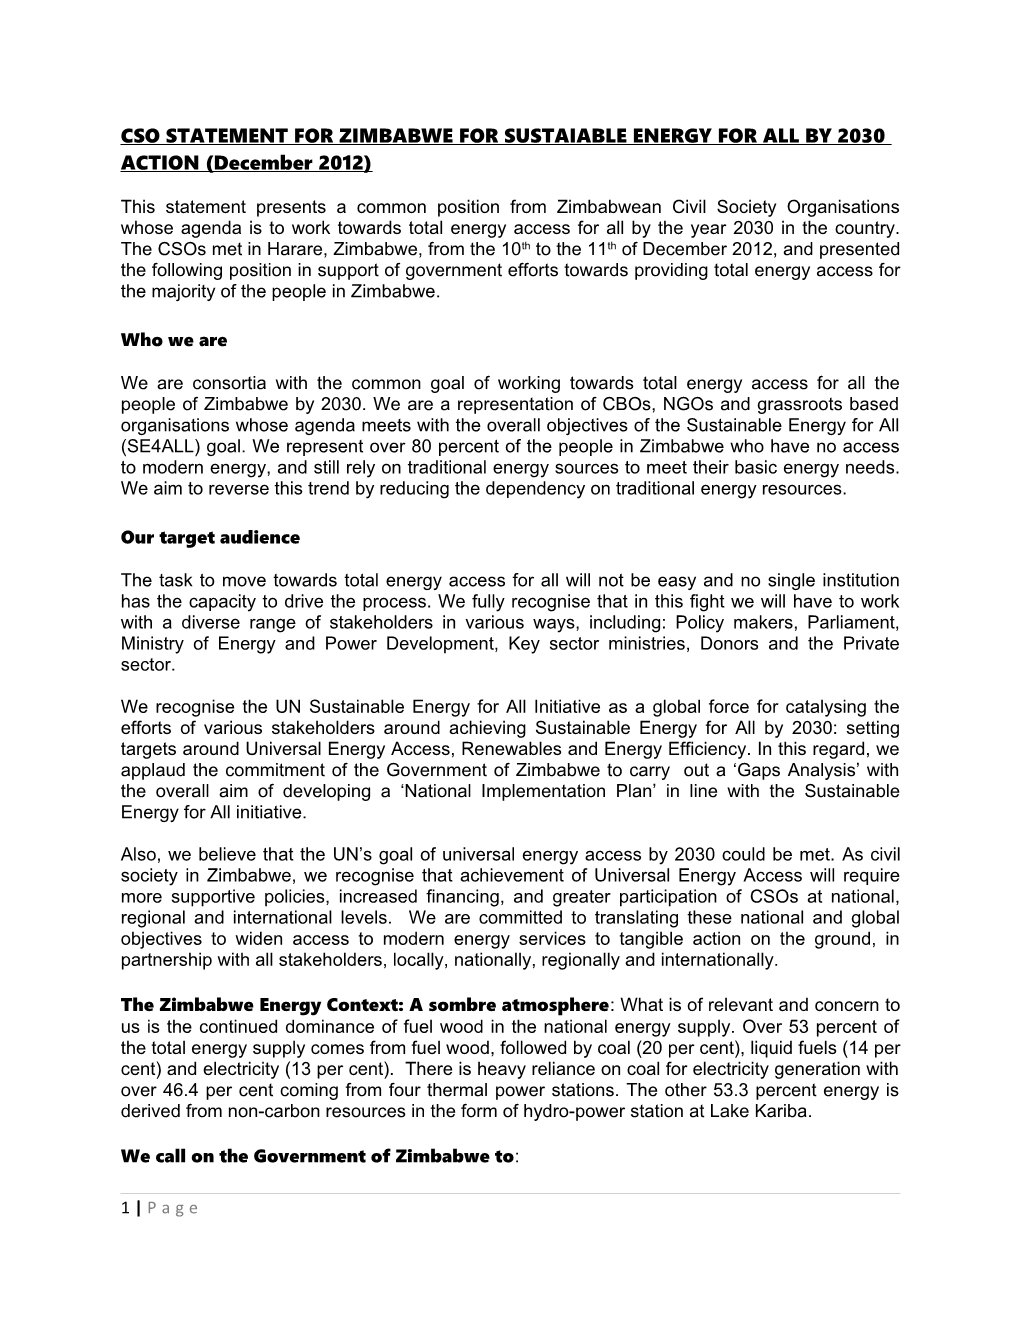 CSO STATEMENT for ZIMBABWE for SUSTAIABLE ENERGY for ALL by 2030 ACTION (December 2012)